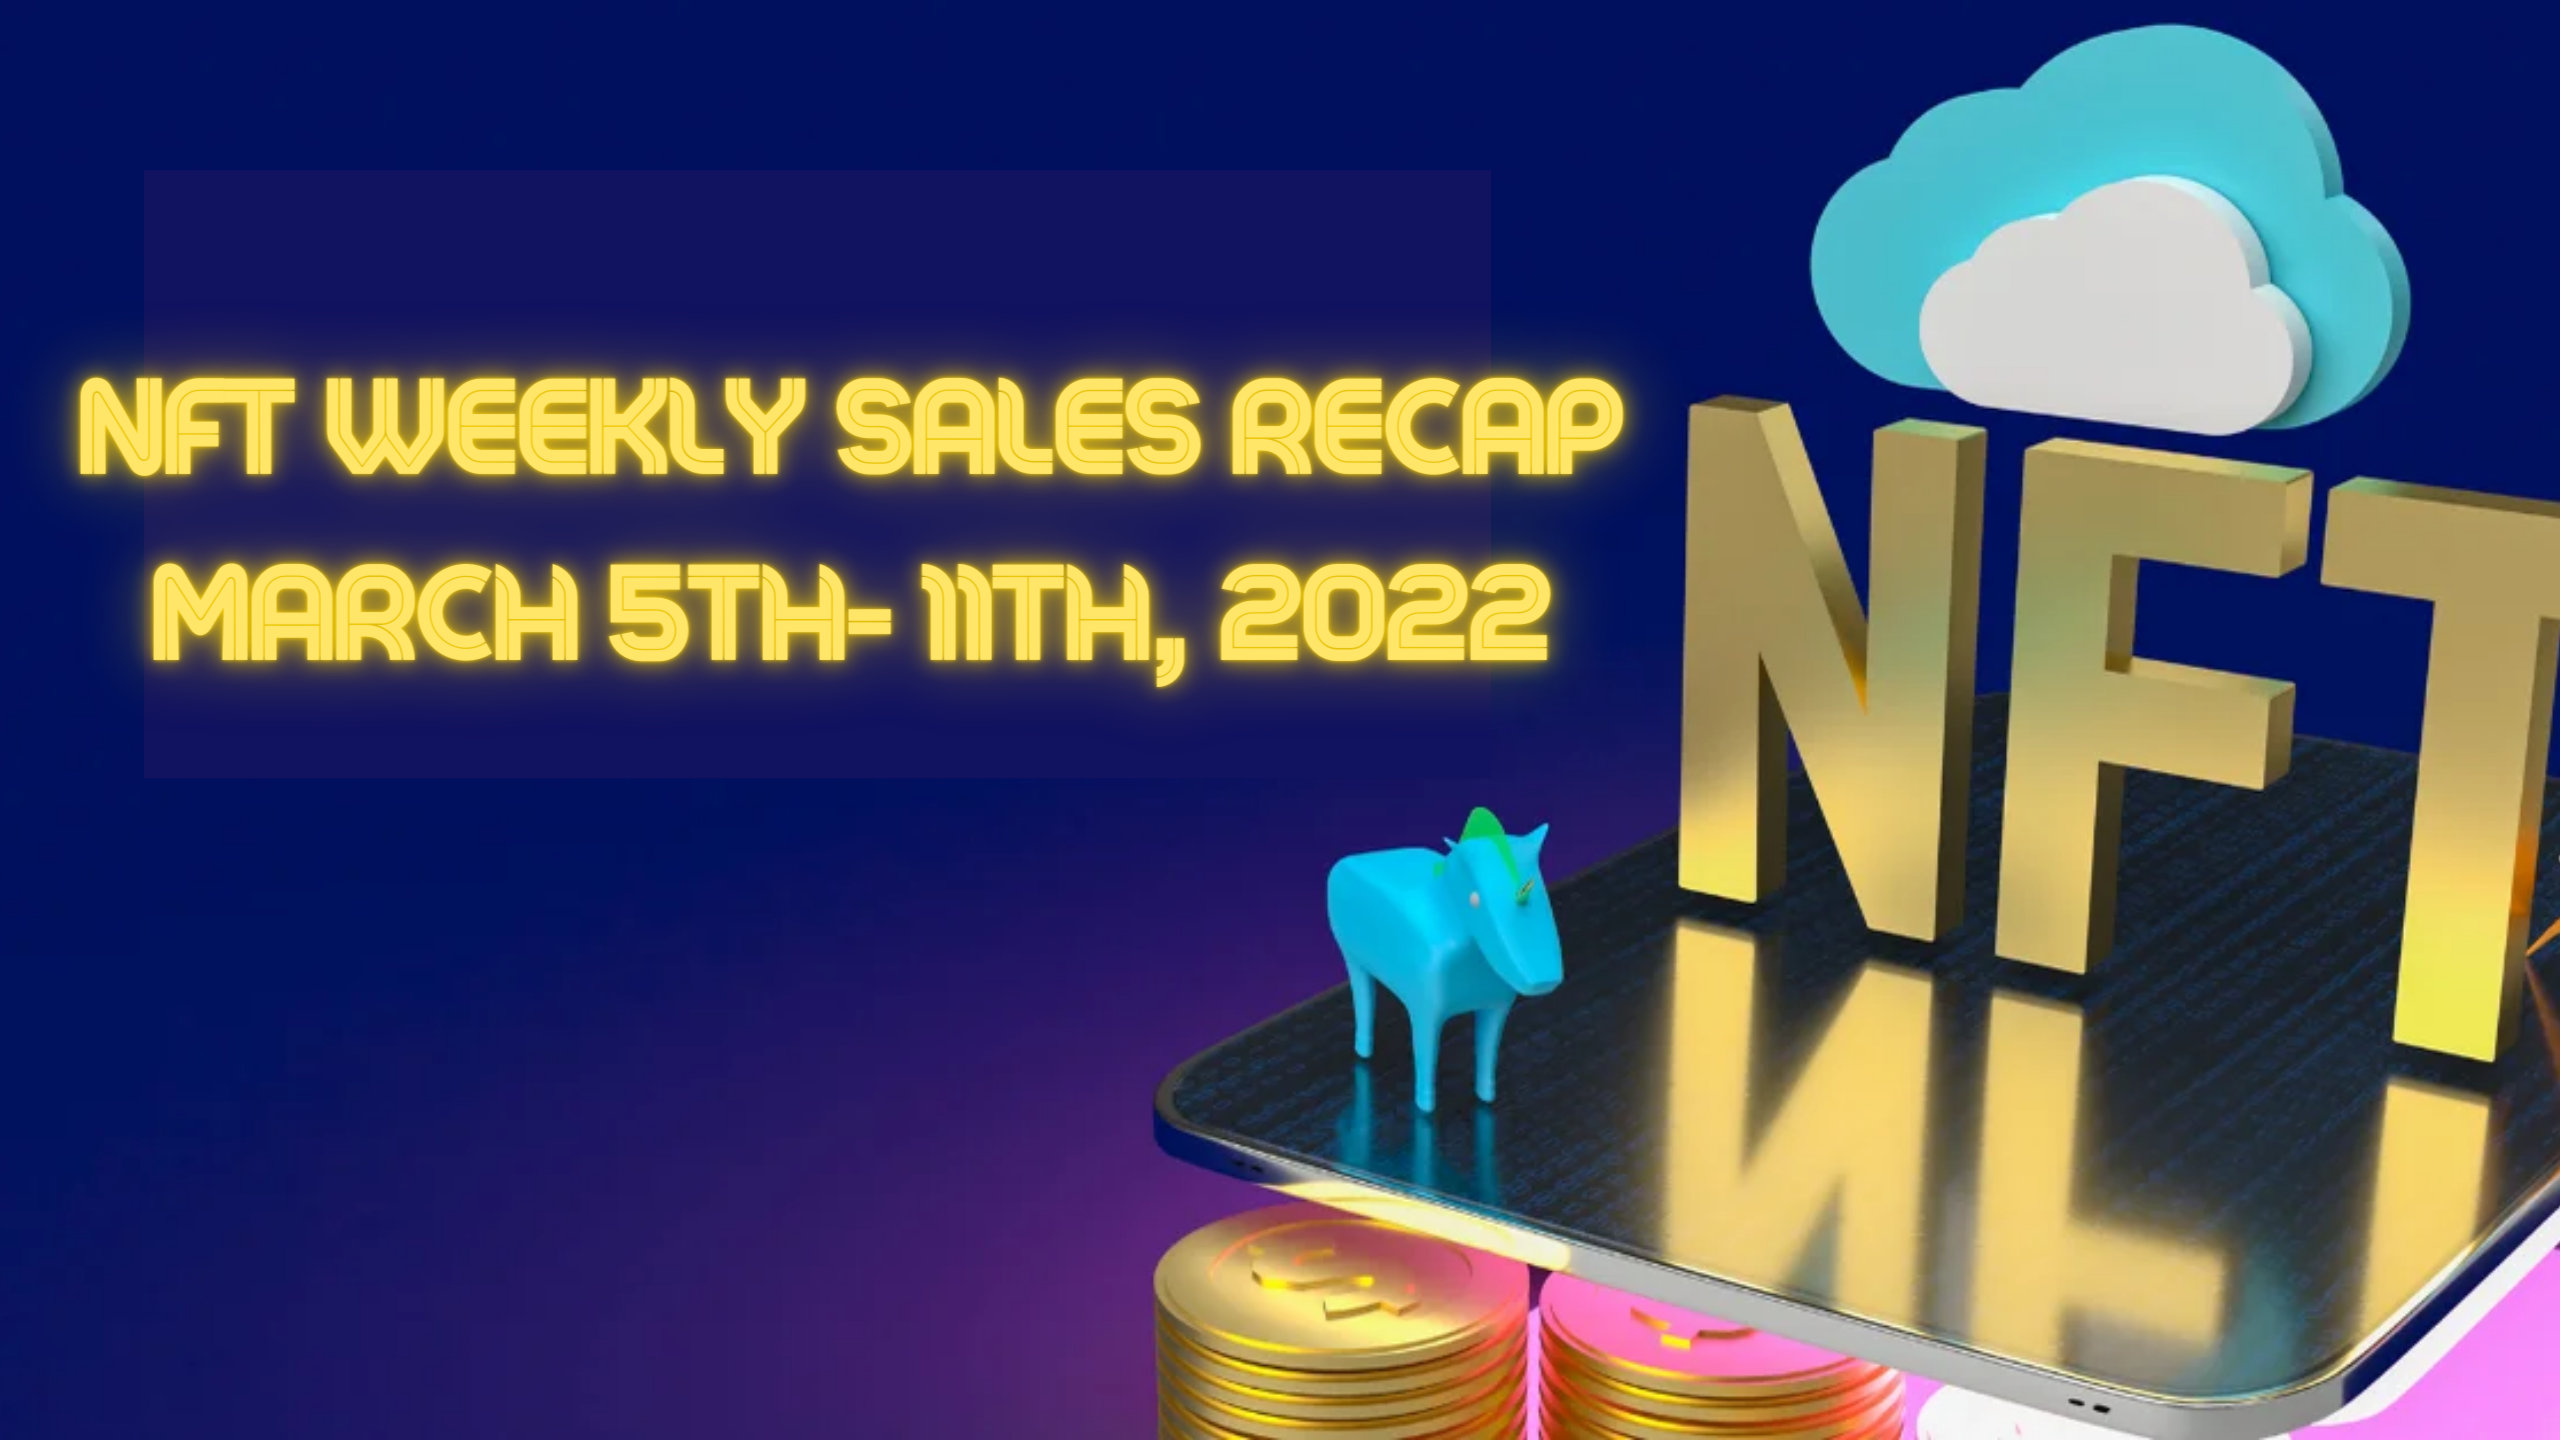 NFT Weekly Sales Recap (March 5th- 11th, 2022)